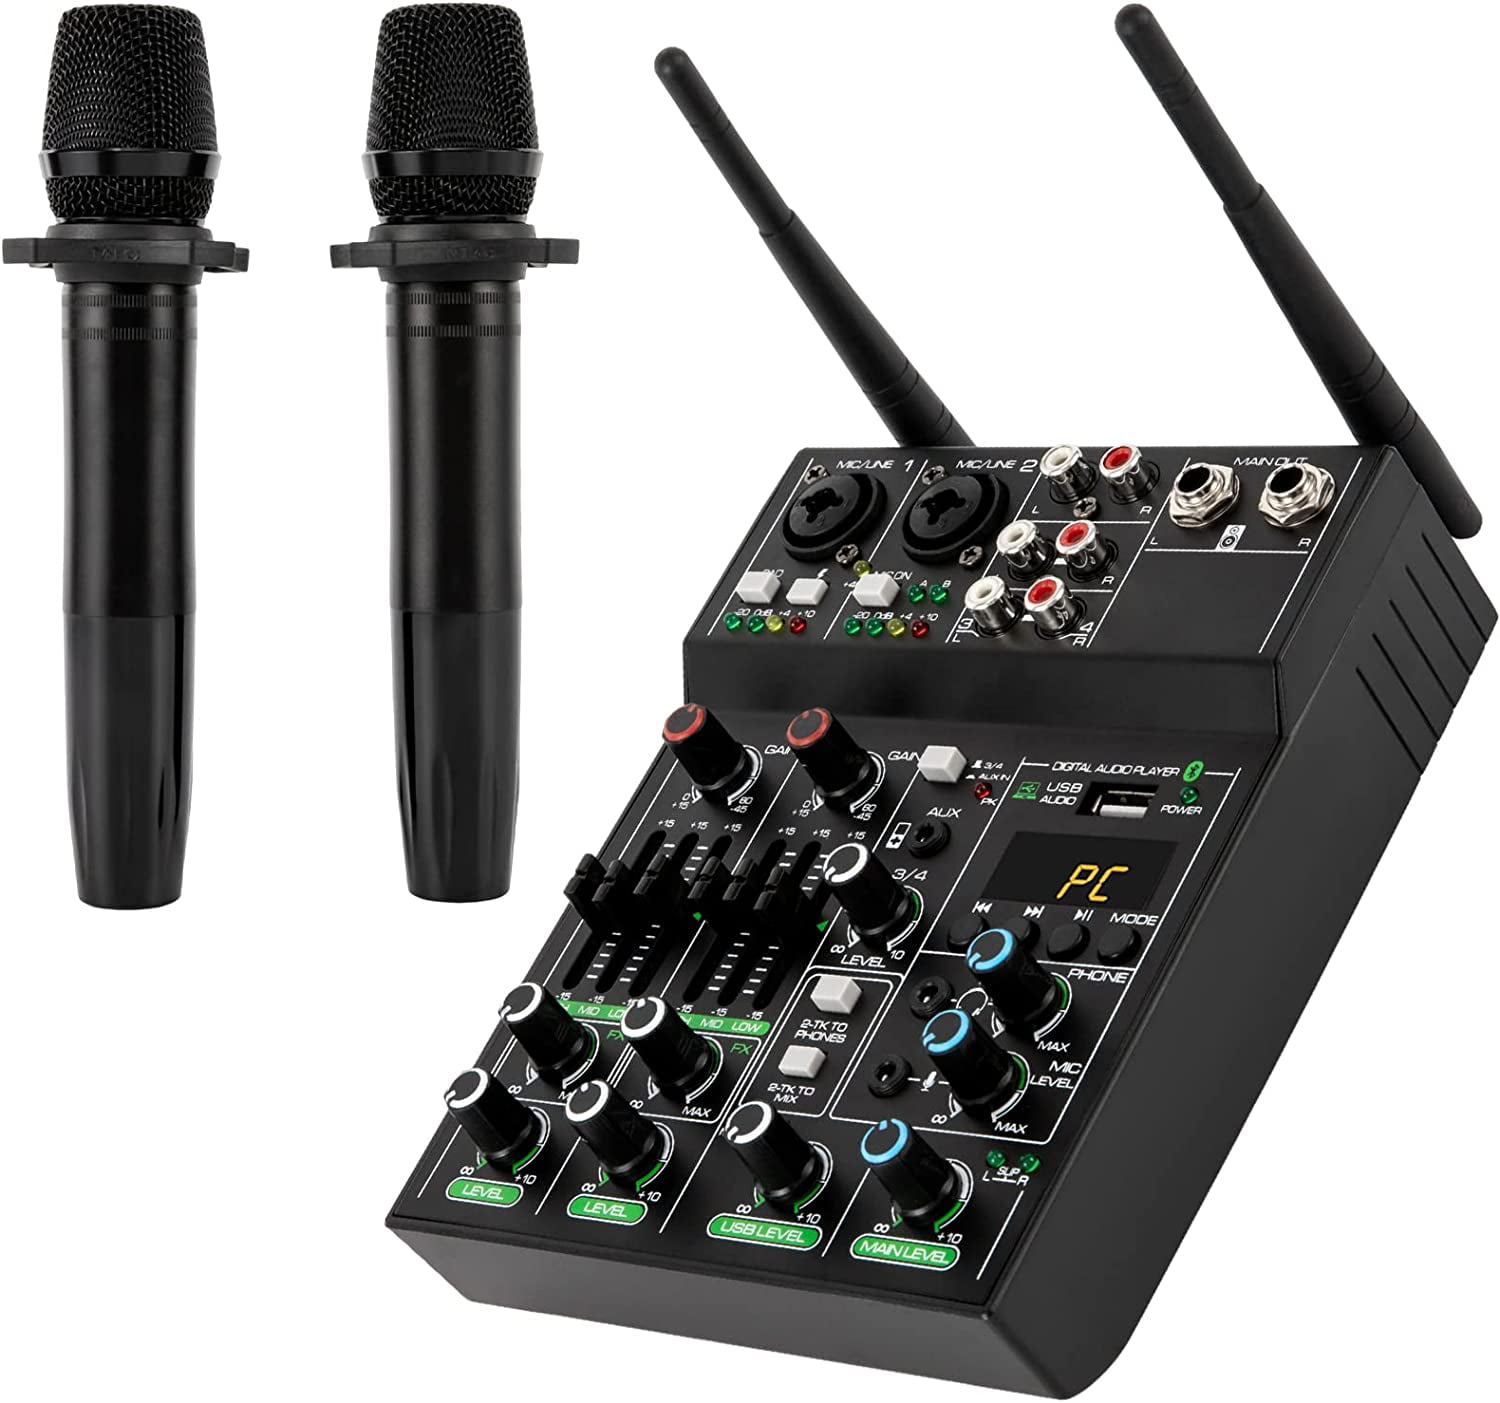 Audio Mixer with support for 4 microphones - MaestroVision - Audio & Video  Management Solutions